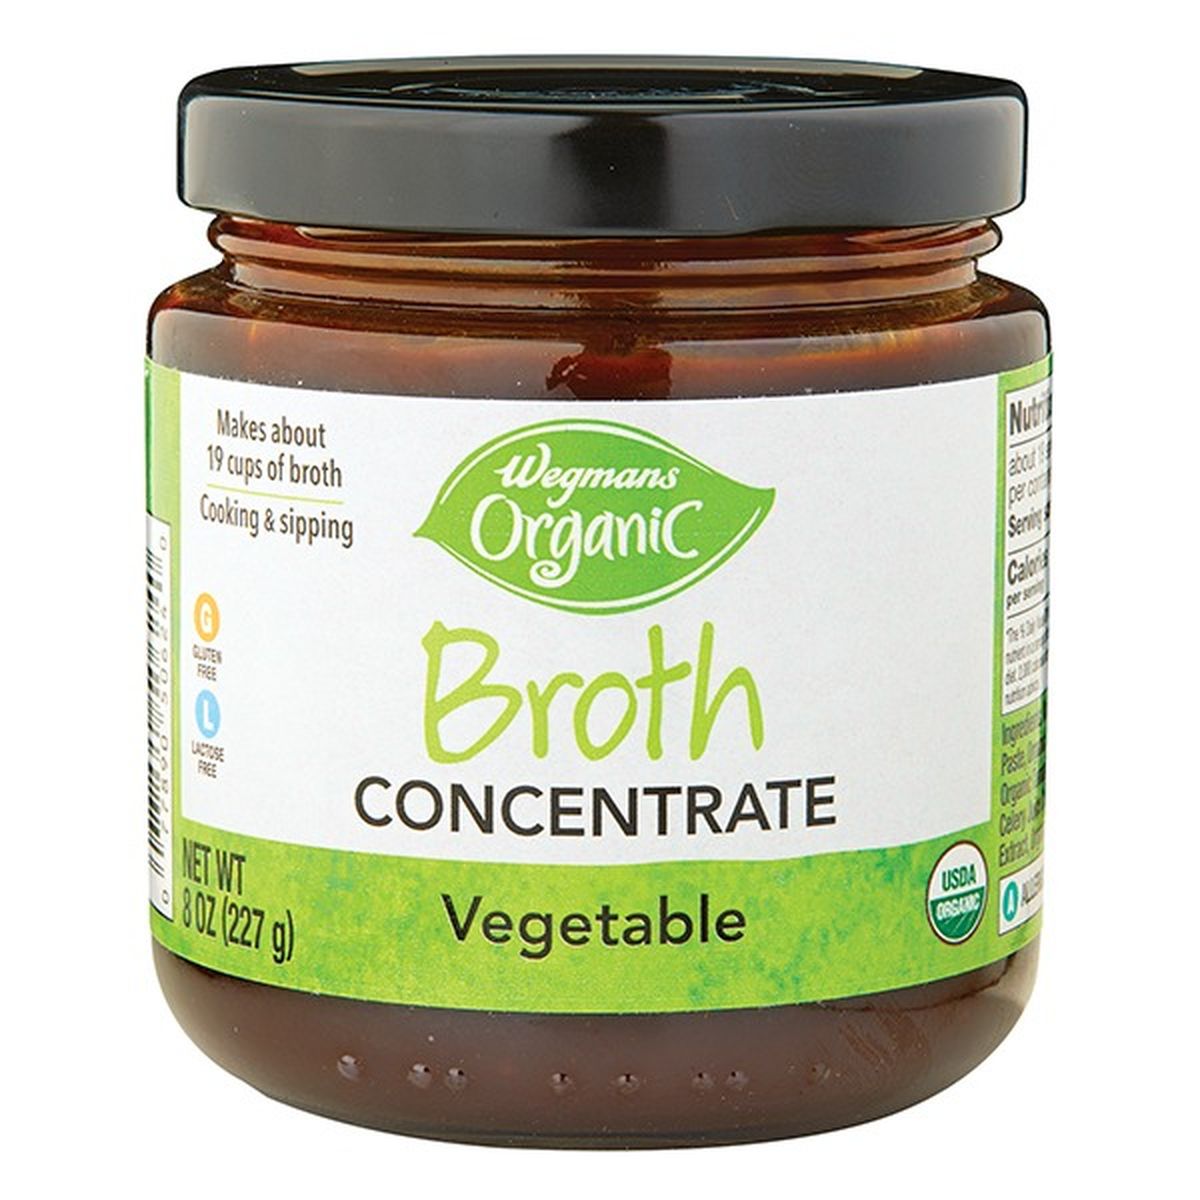 Calories in Wegmans Organic Vegetable Broth Concentrate